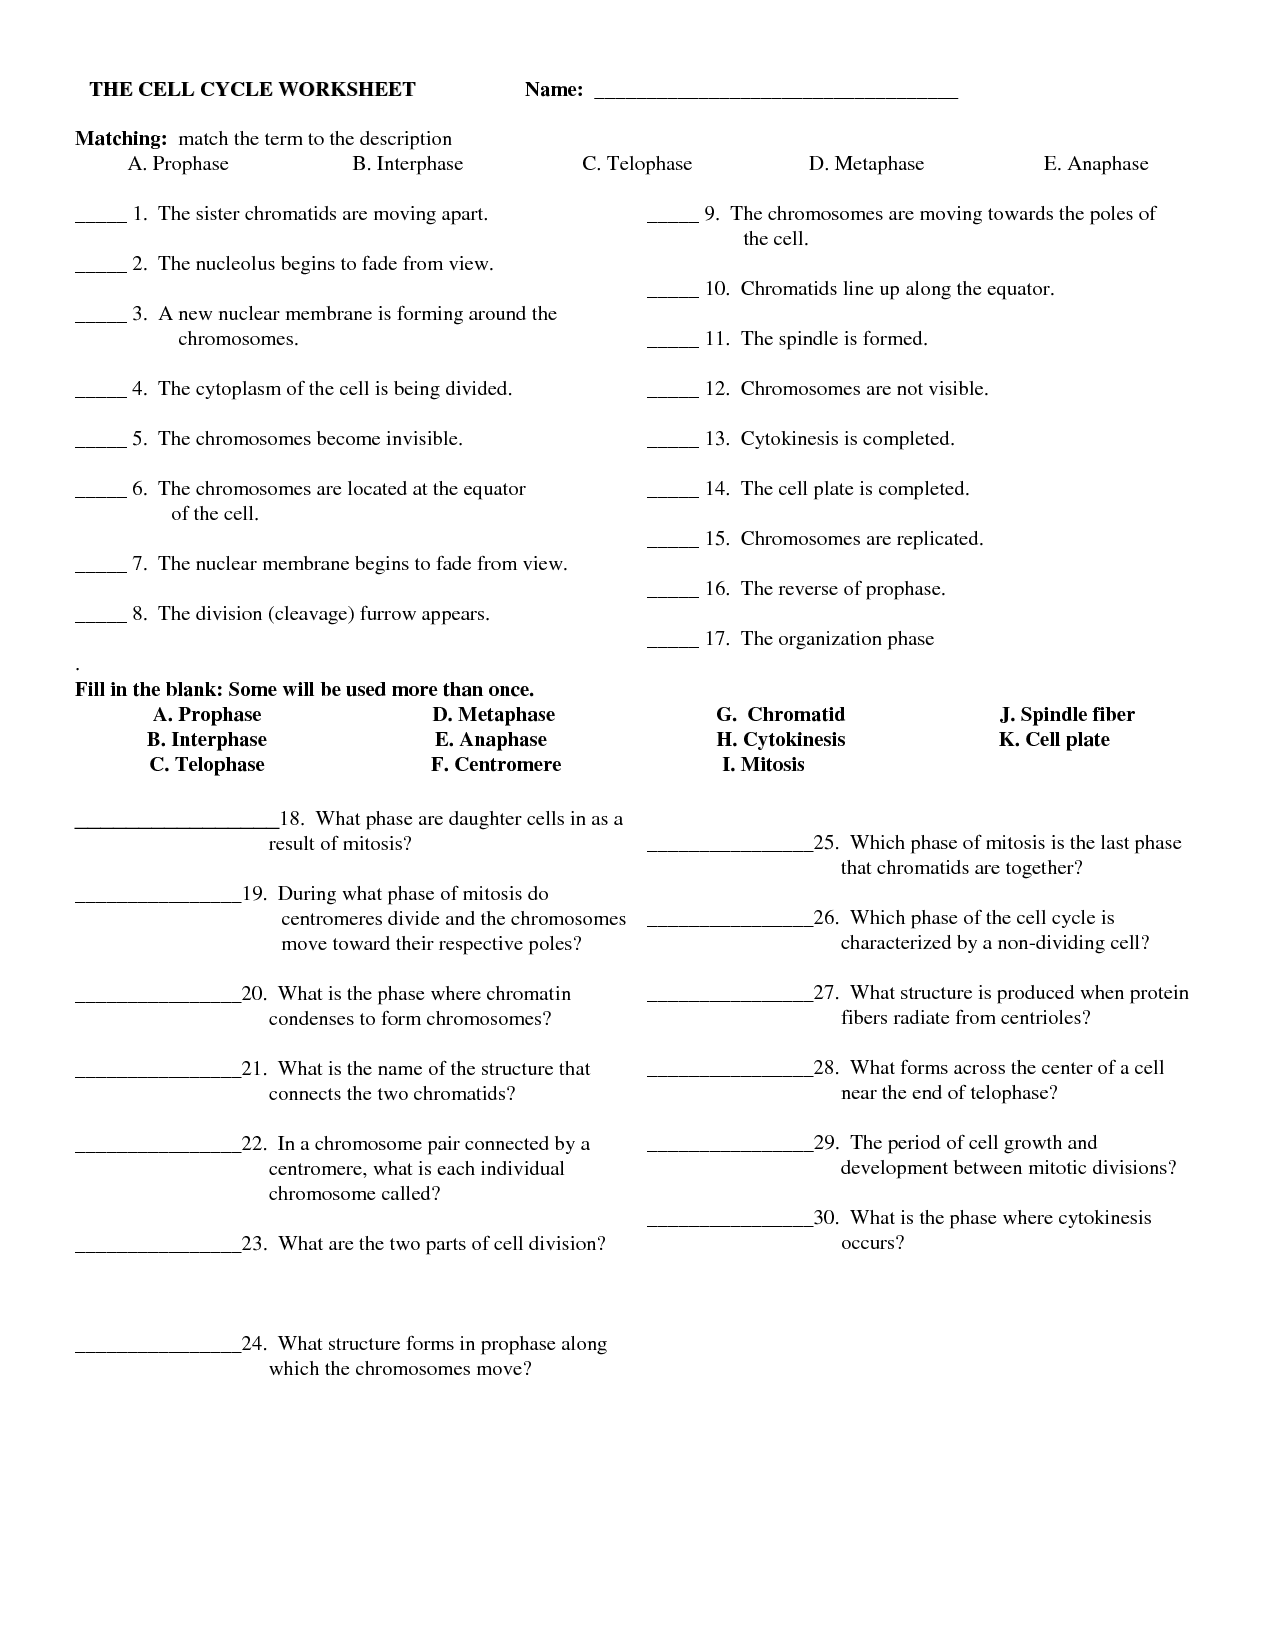 14-best-images-of-mitosis-worksheet-answers-crossword-cell-division-crossword-puzzle-answer